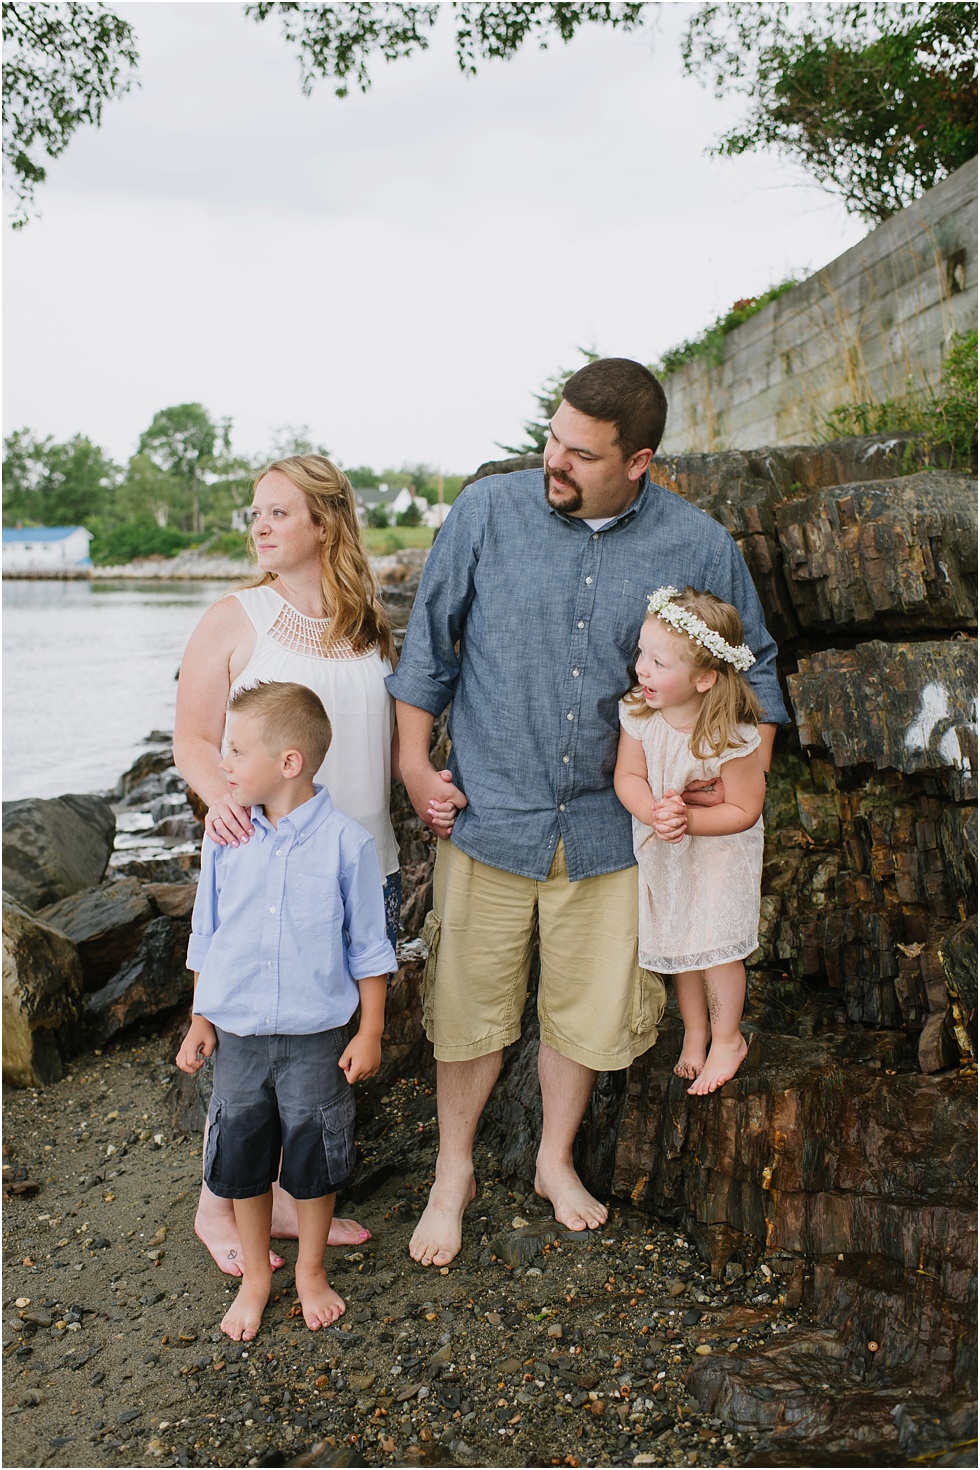 darling family session searsport maine beach lifestyle_0025